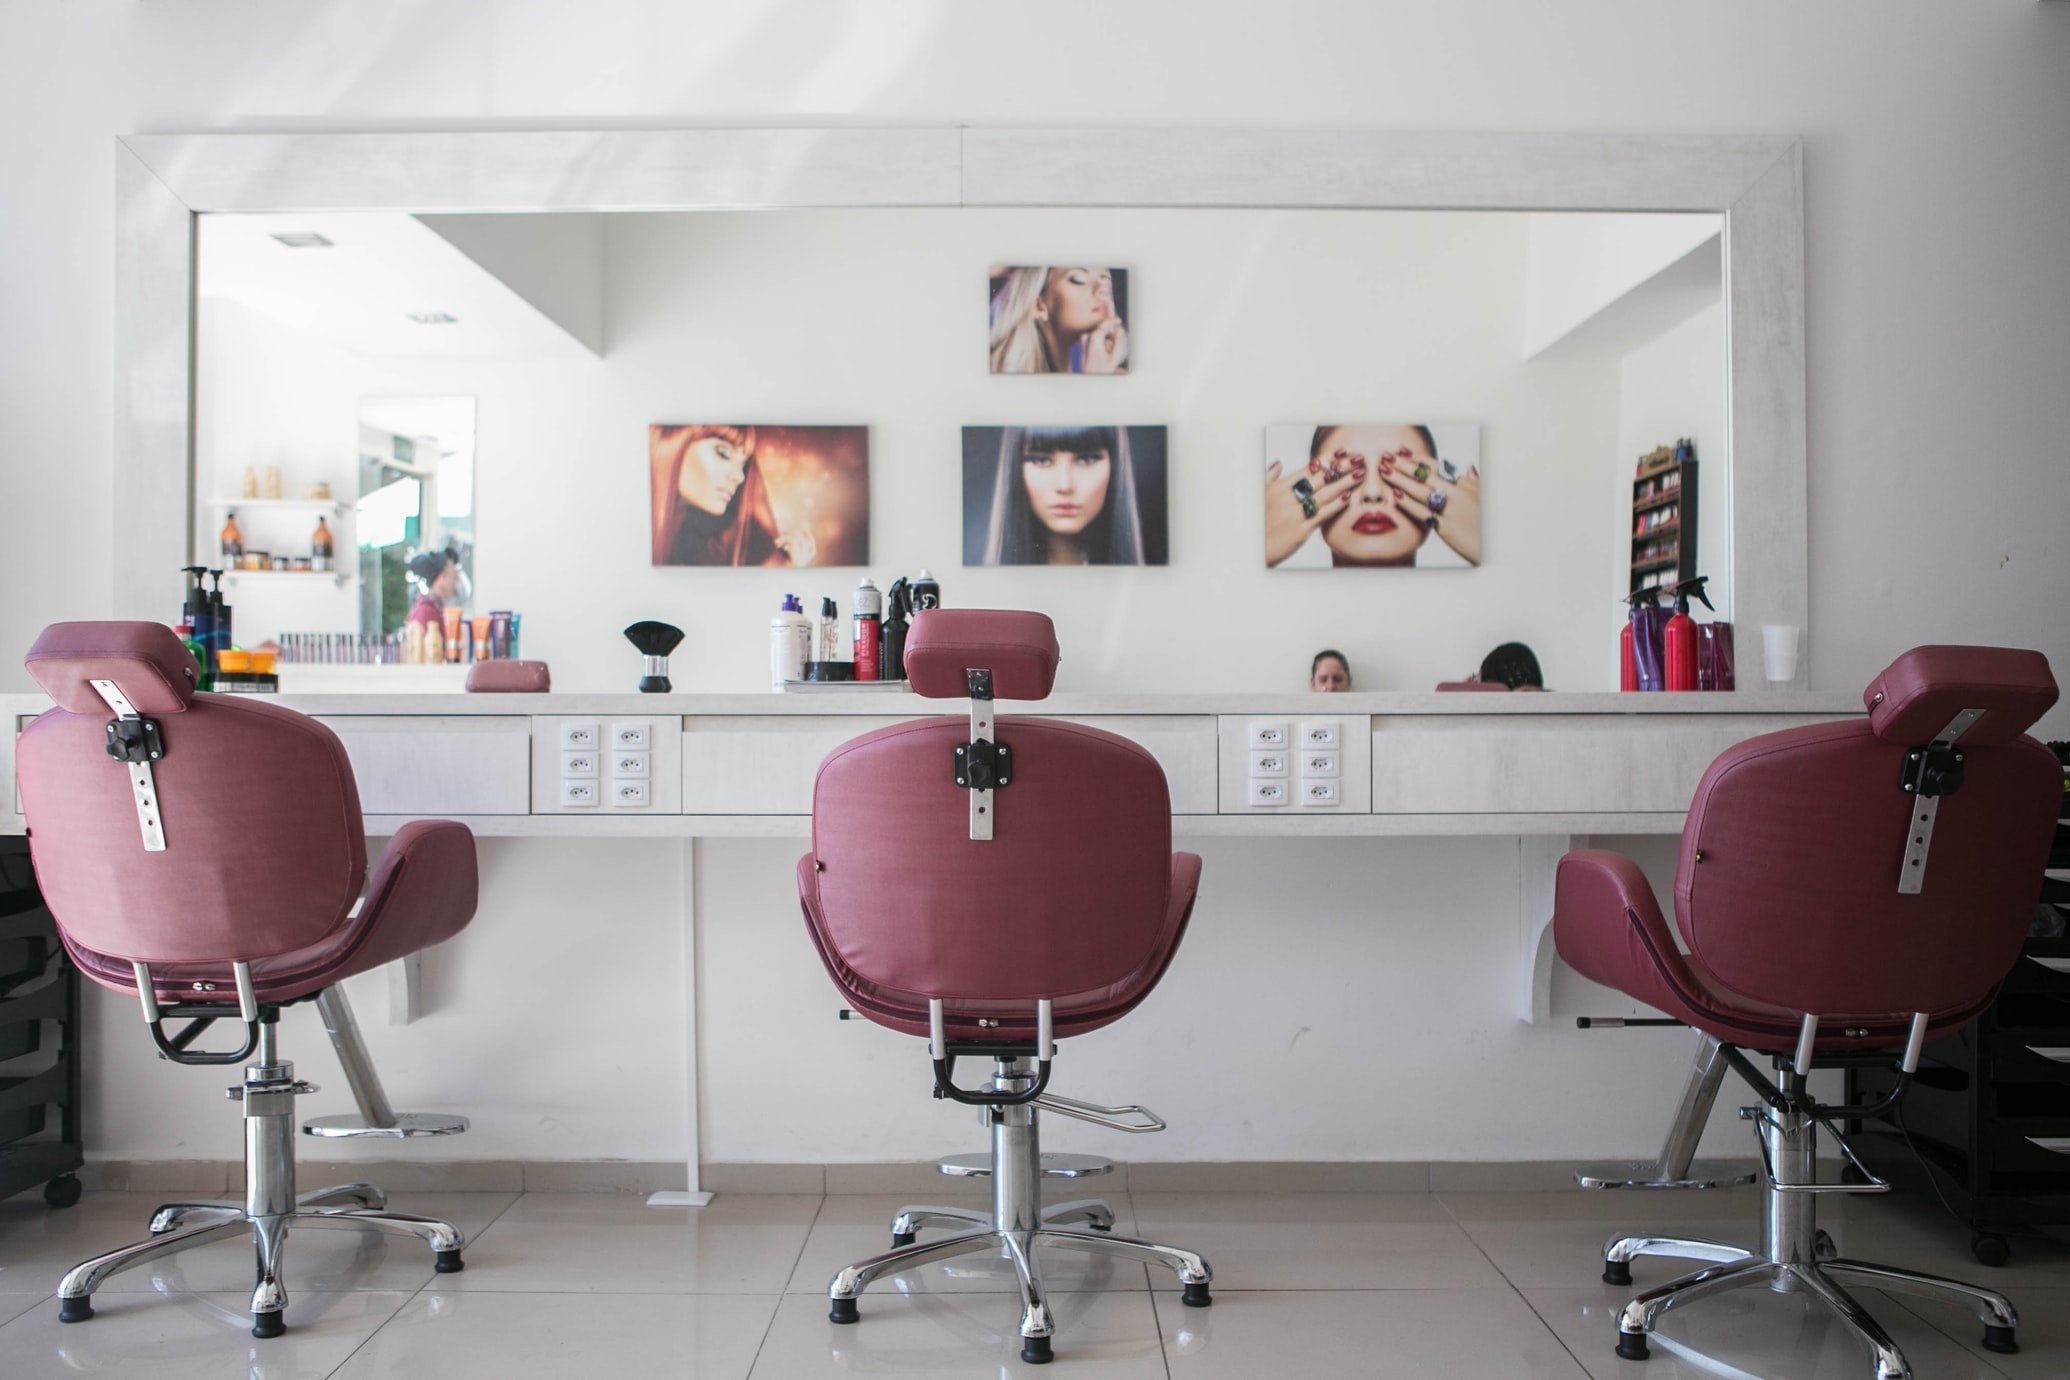 Ryan takes Amber to a beauty salon for makeup |  Source: Unsplash